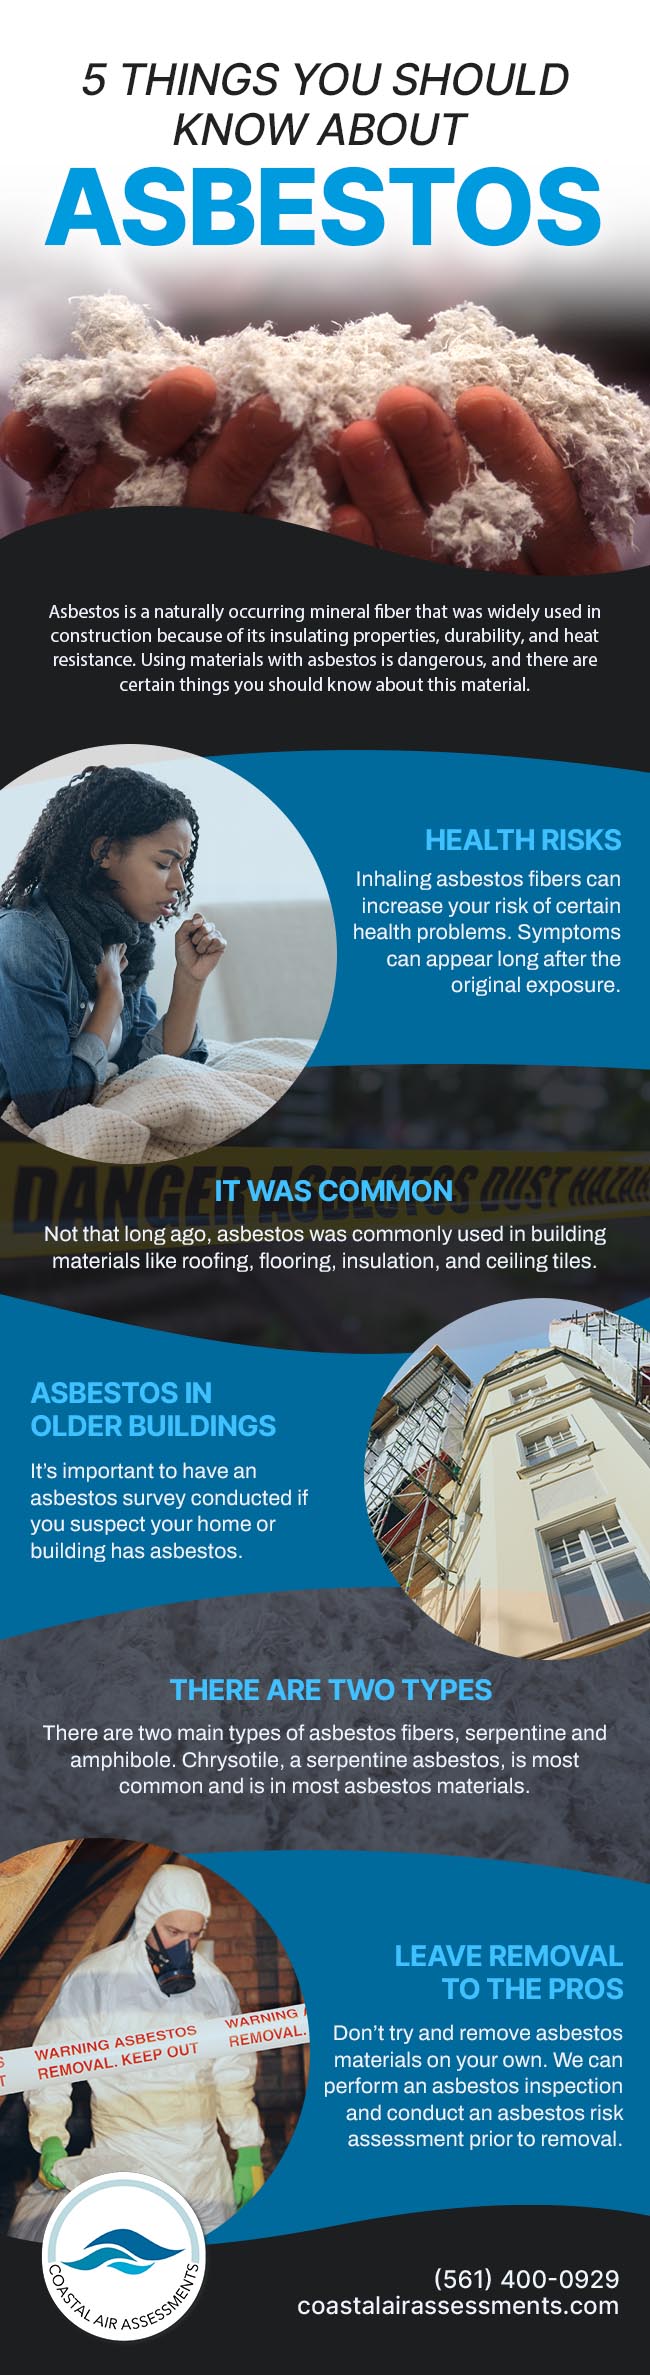 5 Things You Should Know About Asbestos